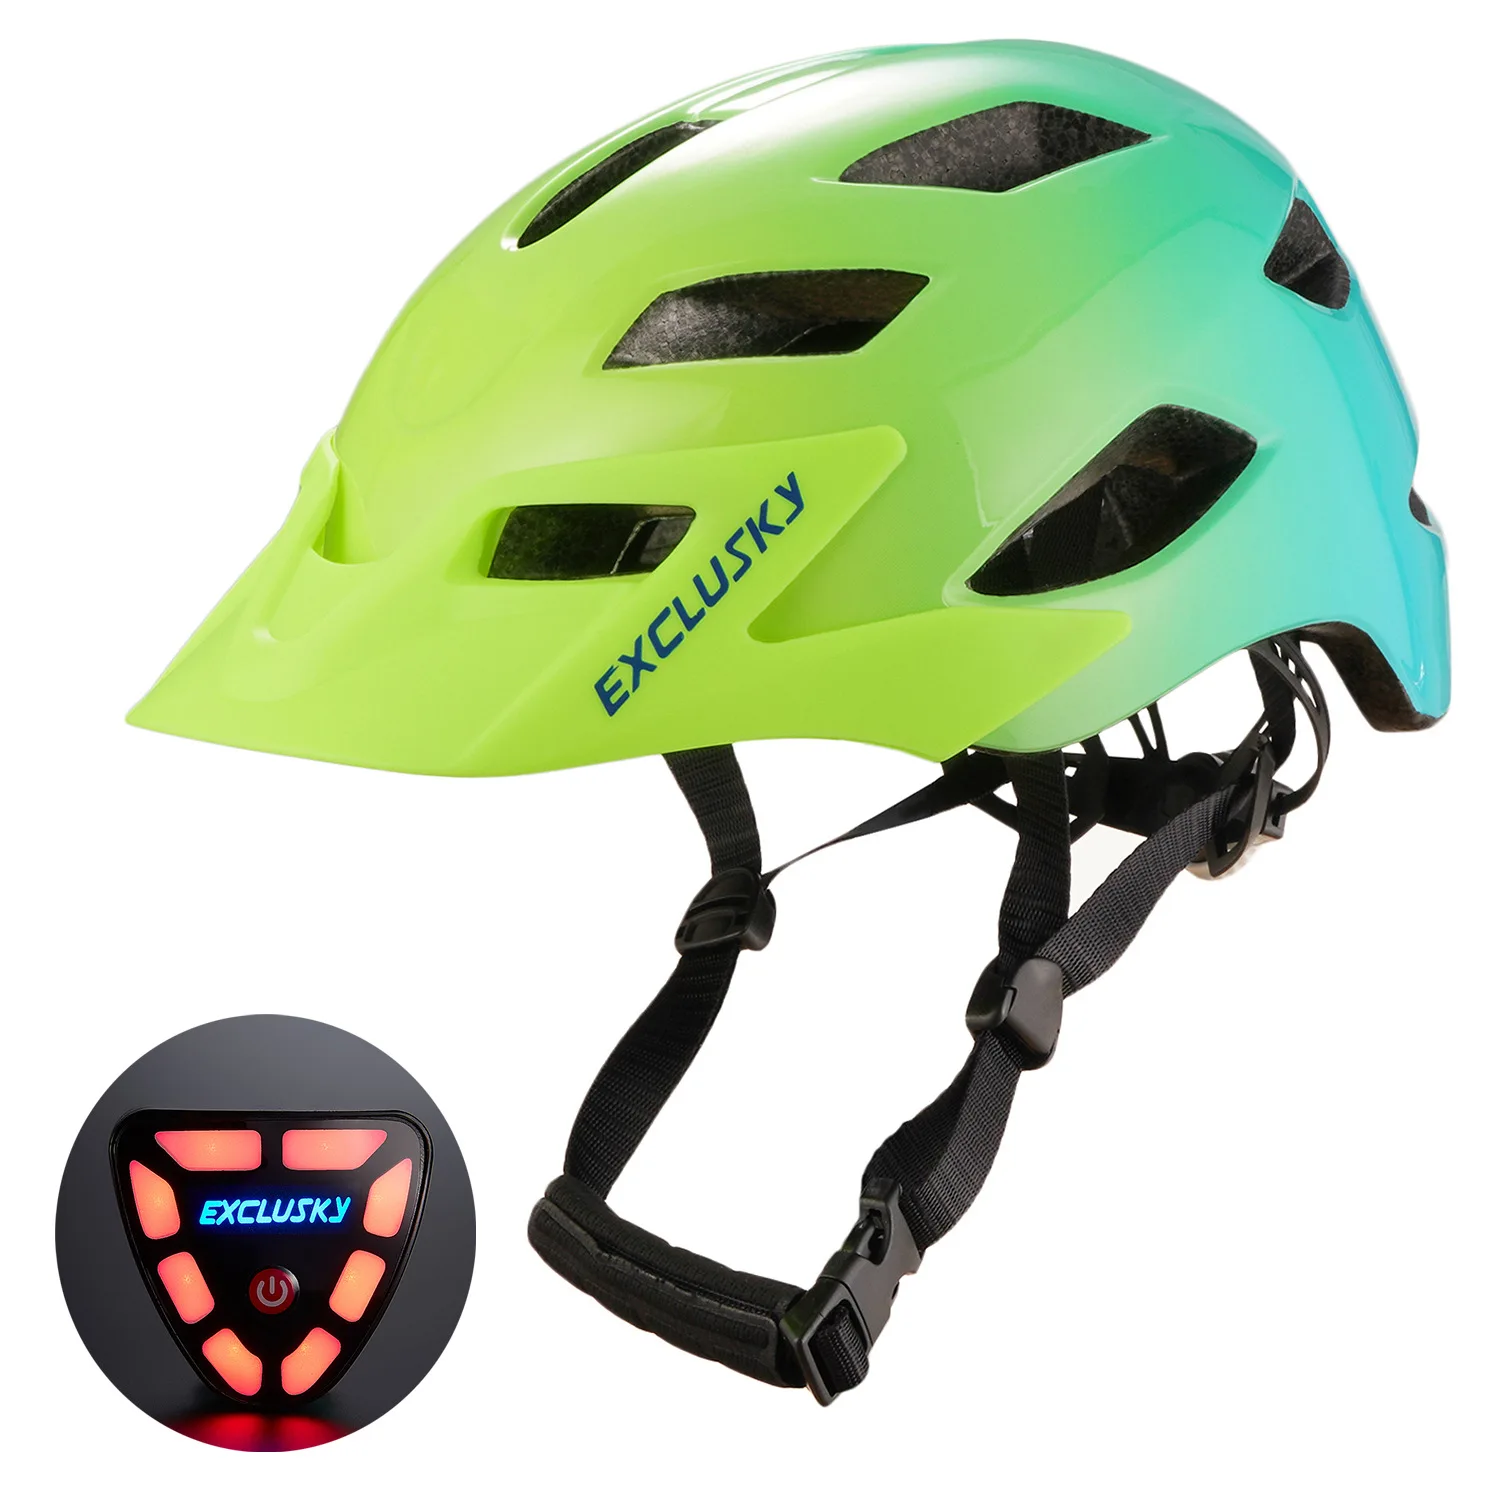 

Exclusky Adult Mountain Light Bike Helmet Bicycle With Rechargeable USB Safety LED CPSC CE Certified